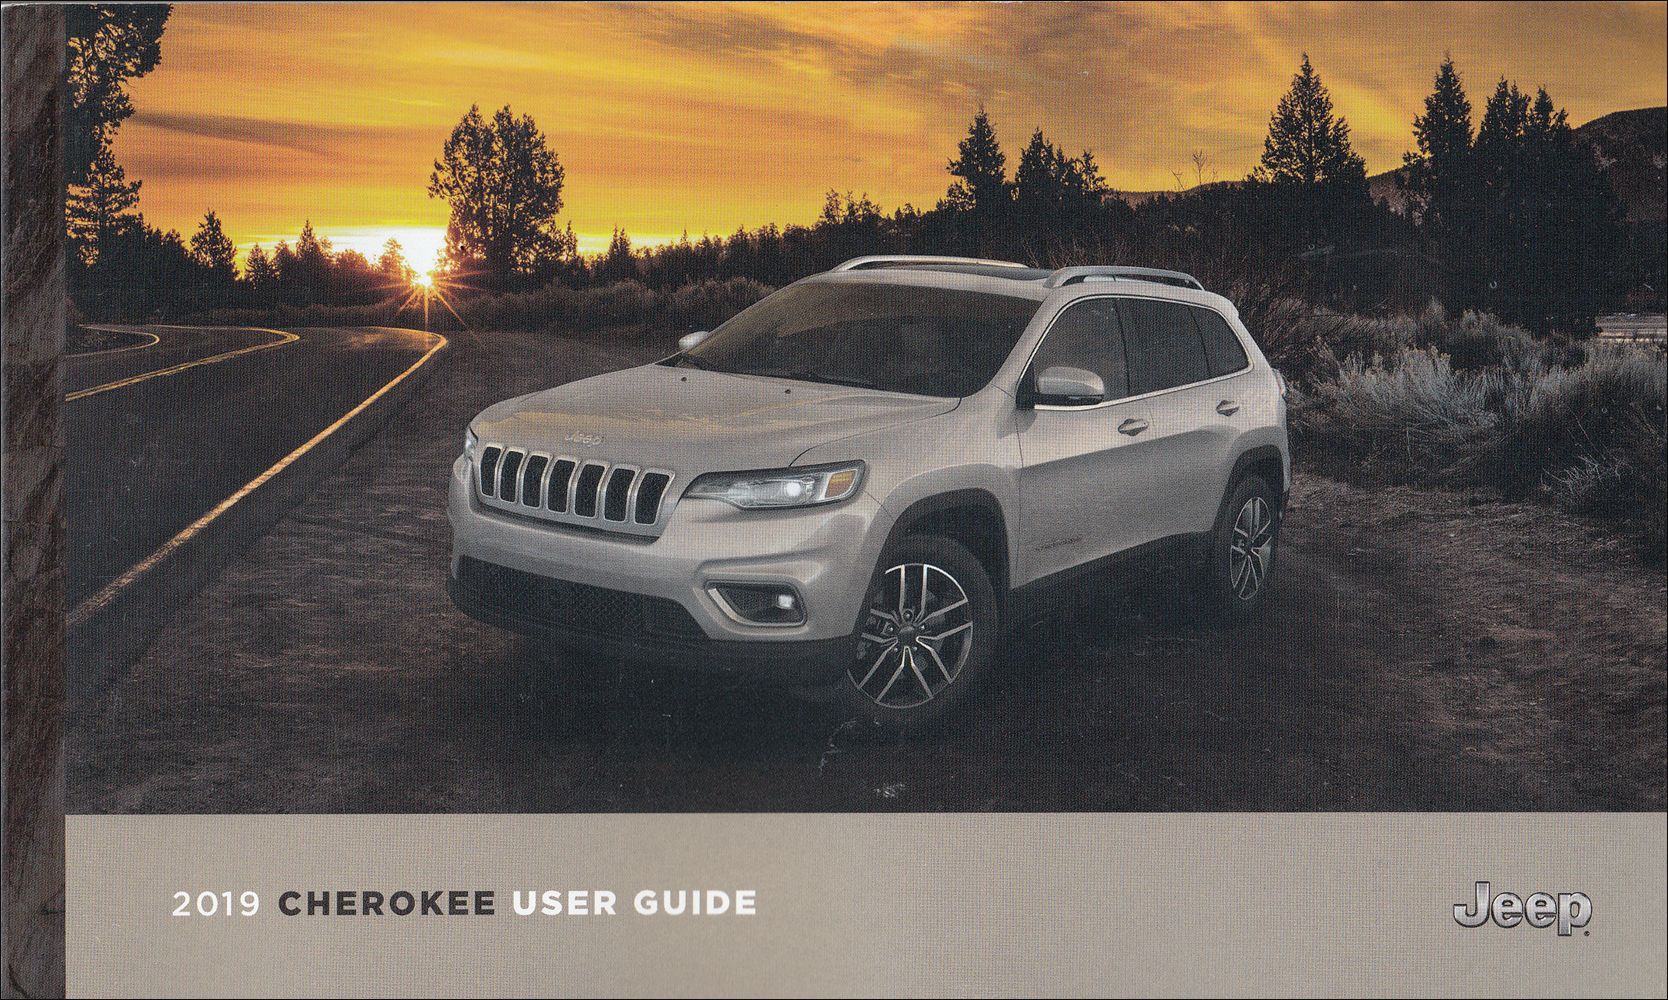 1999 Jeep Cherokee Owners Manual User Guide.